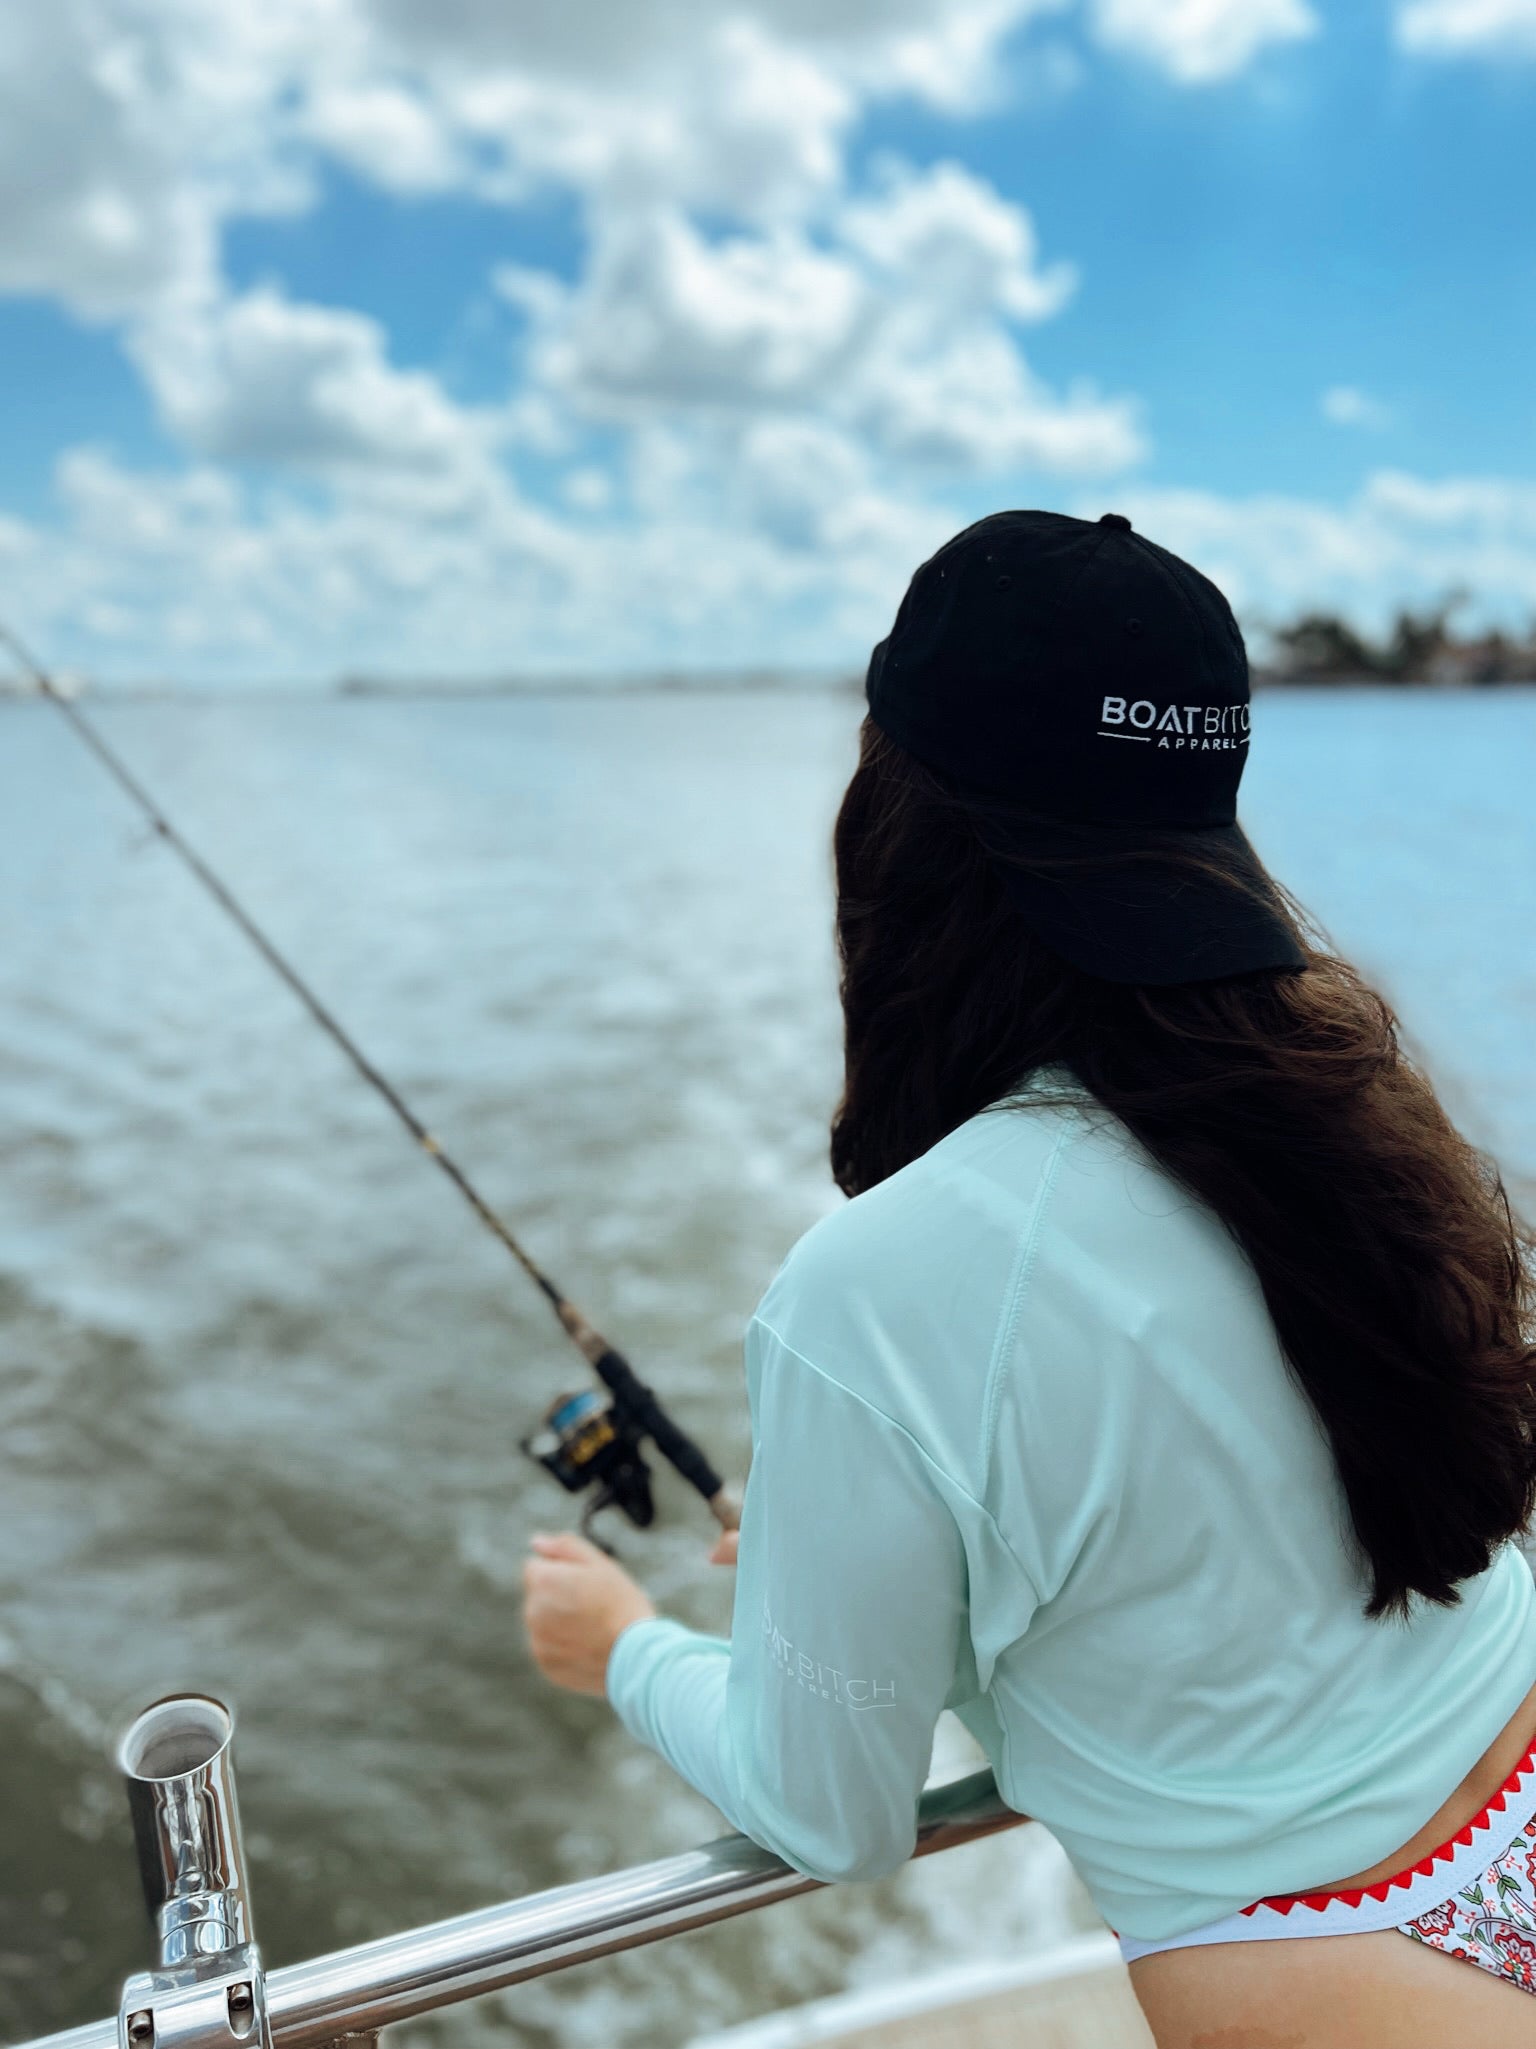 Boat Bitch Apparel  Women's Boating Apparel, Hats & Accessories